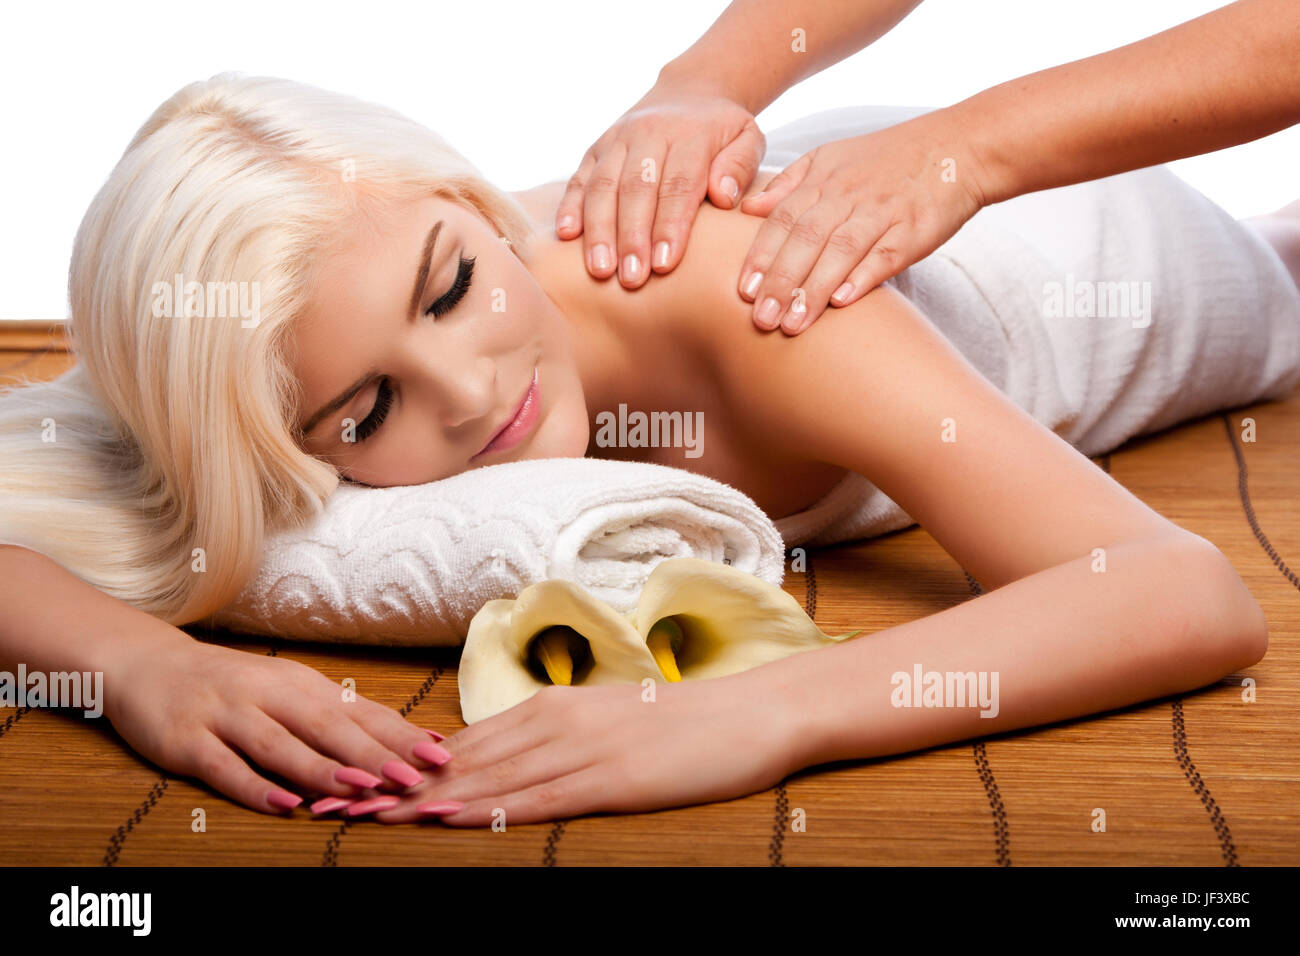 Relaxation pampering shoulder massage spa Stock Photo